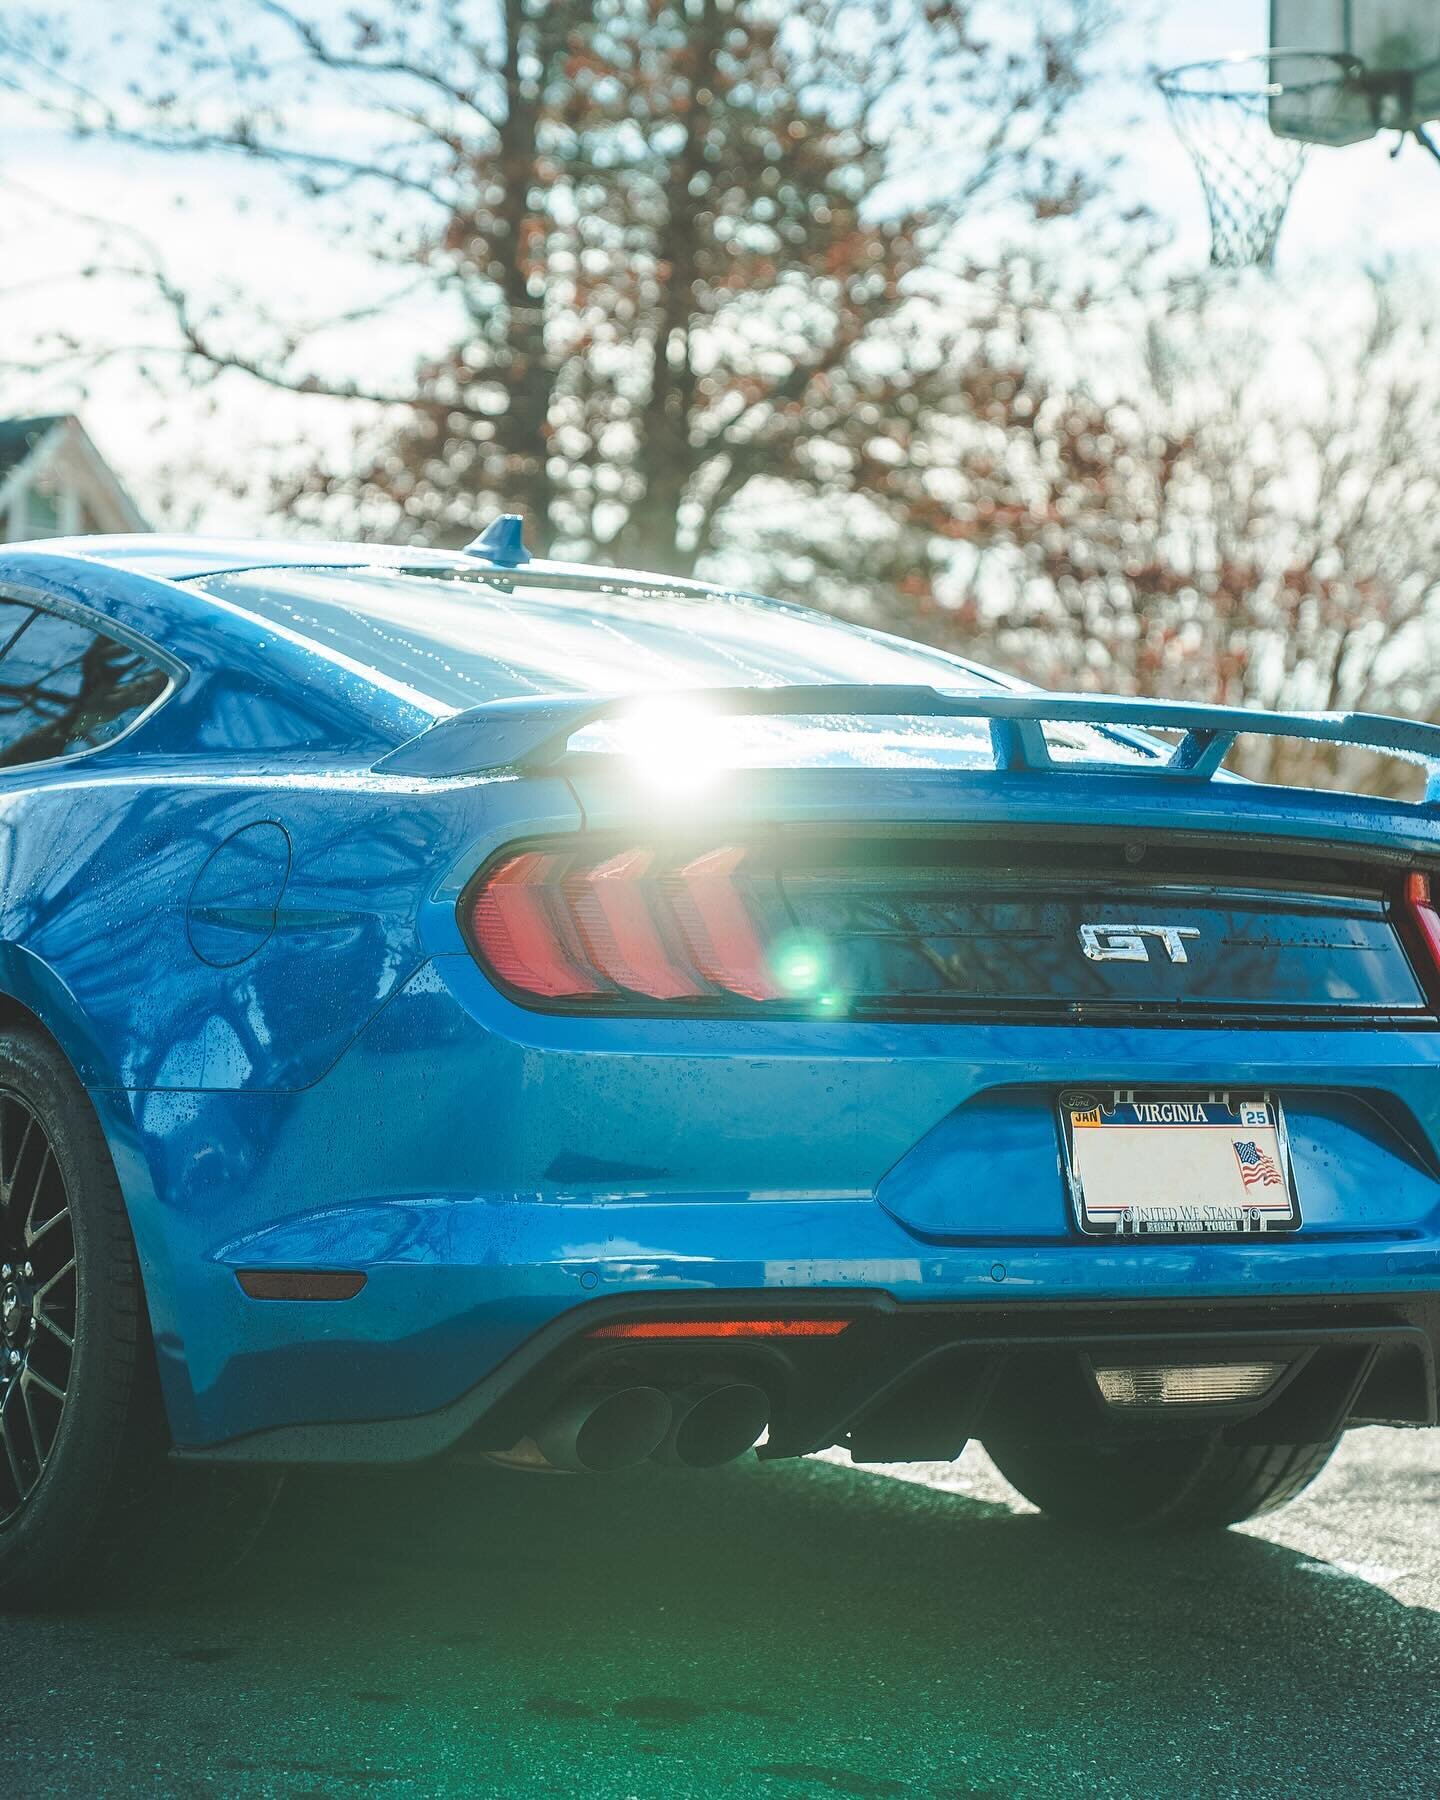 🏁🐎💨

#ford #mustang #gt #fordmustang #mustanggt #5oh #bluey #photgraphy #carphotography #cars #car #sony #fx3 #sonycine #sunset #virginia